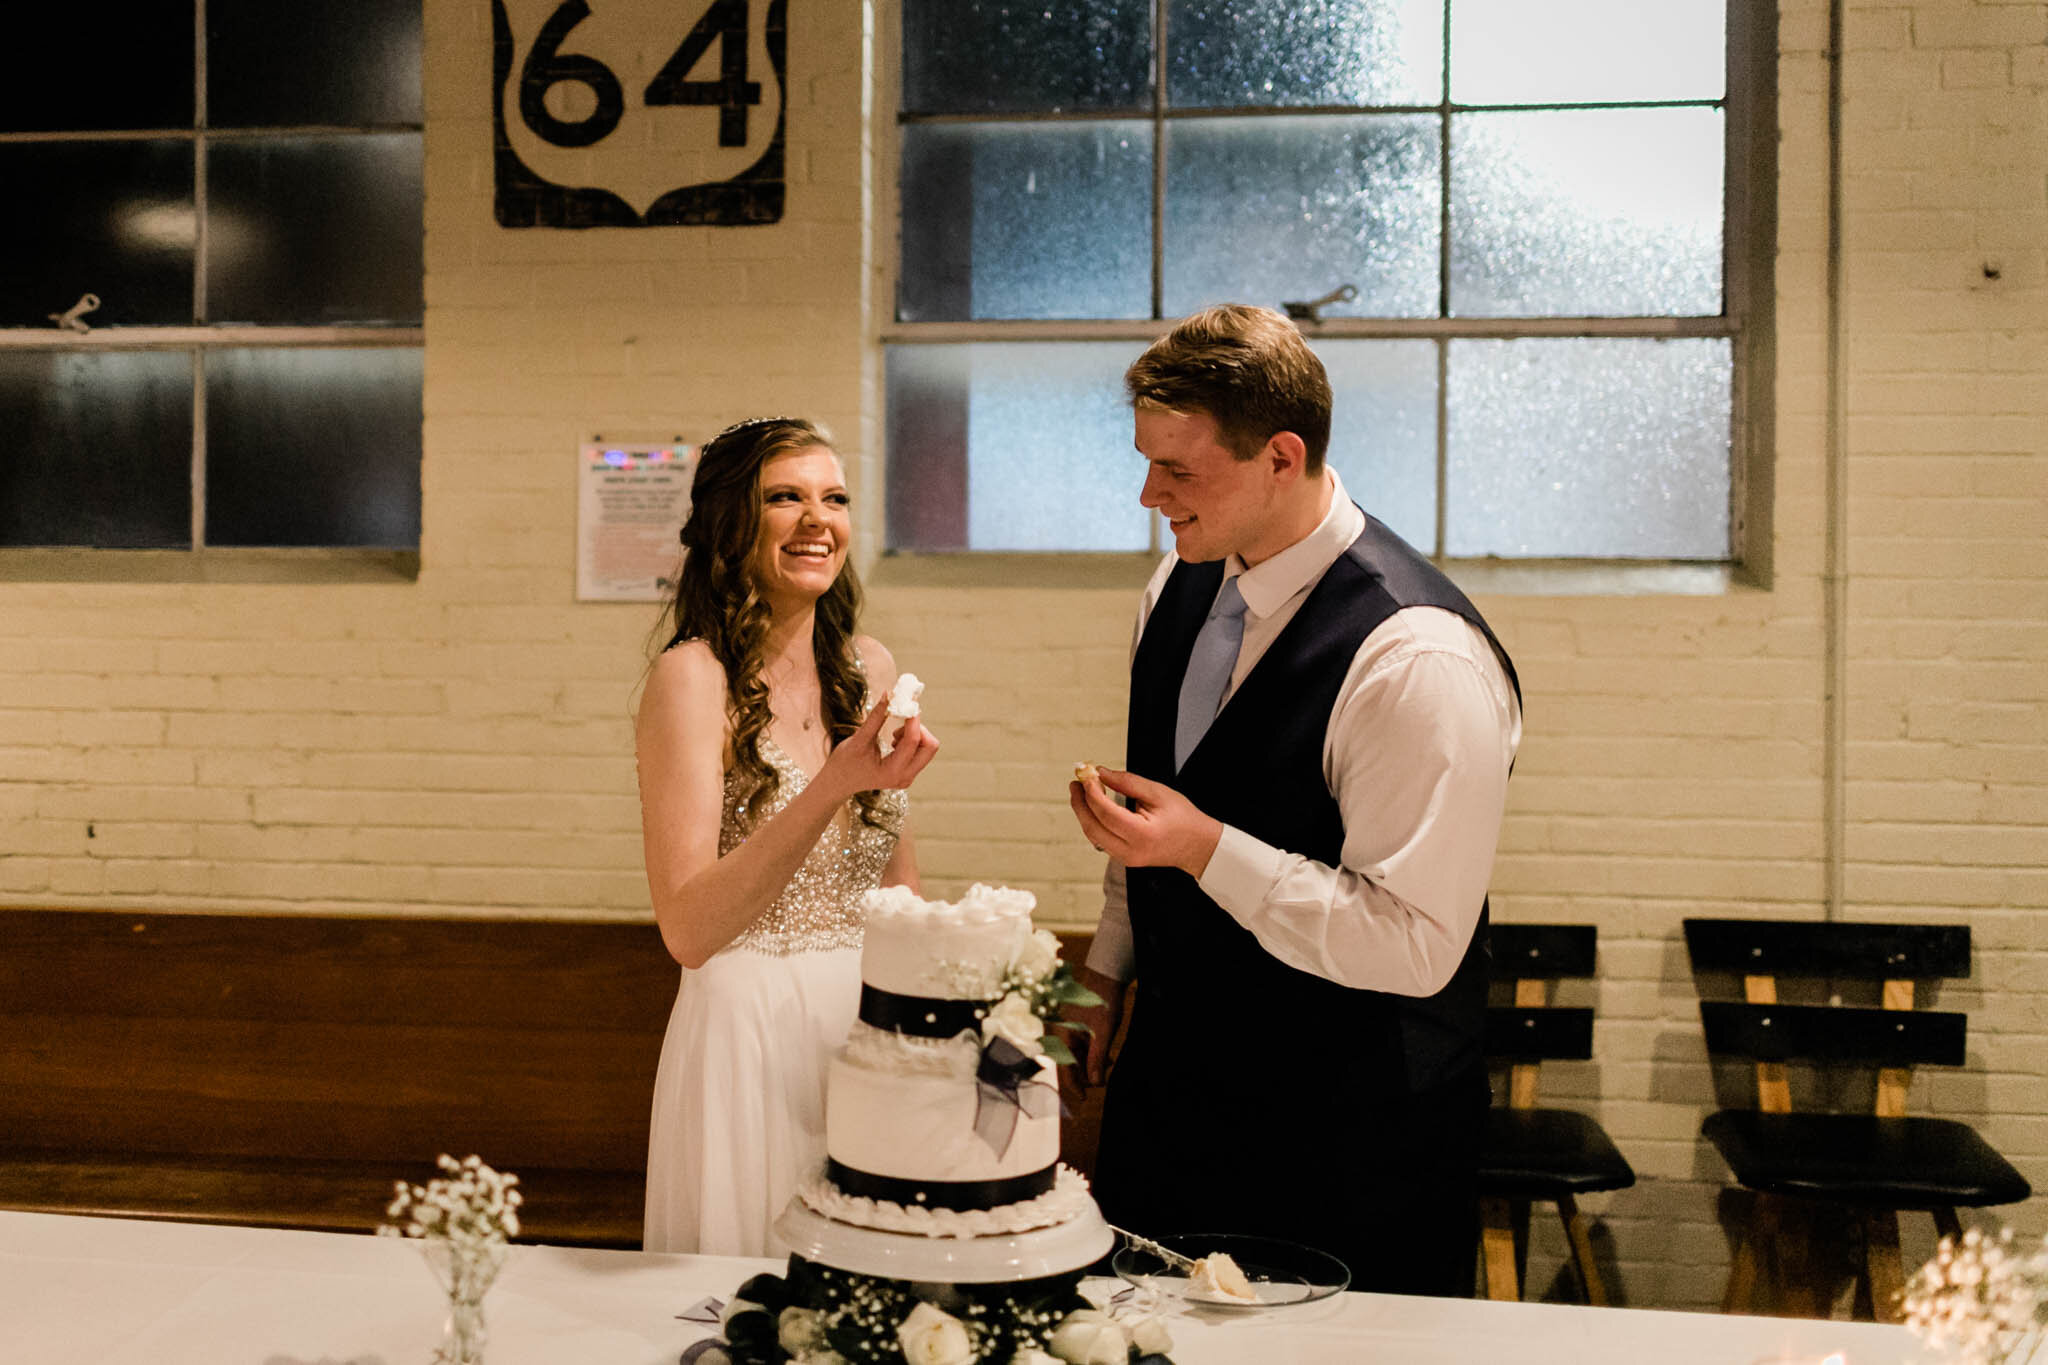 Durham Wedding Photographer | By G. Lin Photography | Bride and groom laughing next to wedding cake